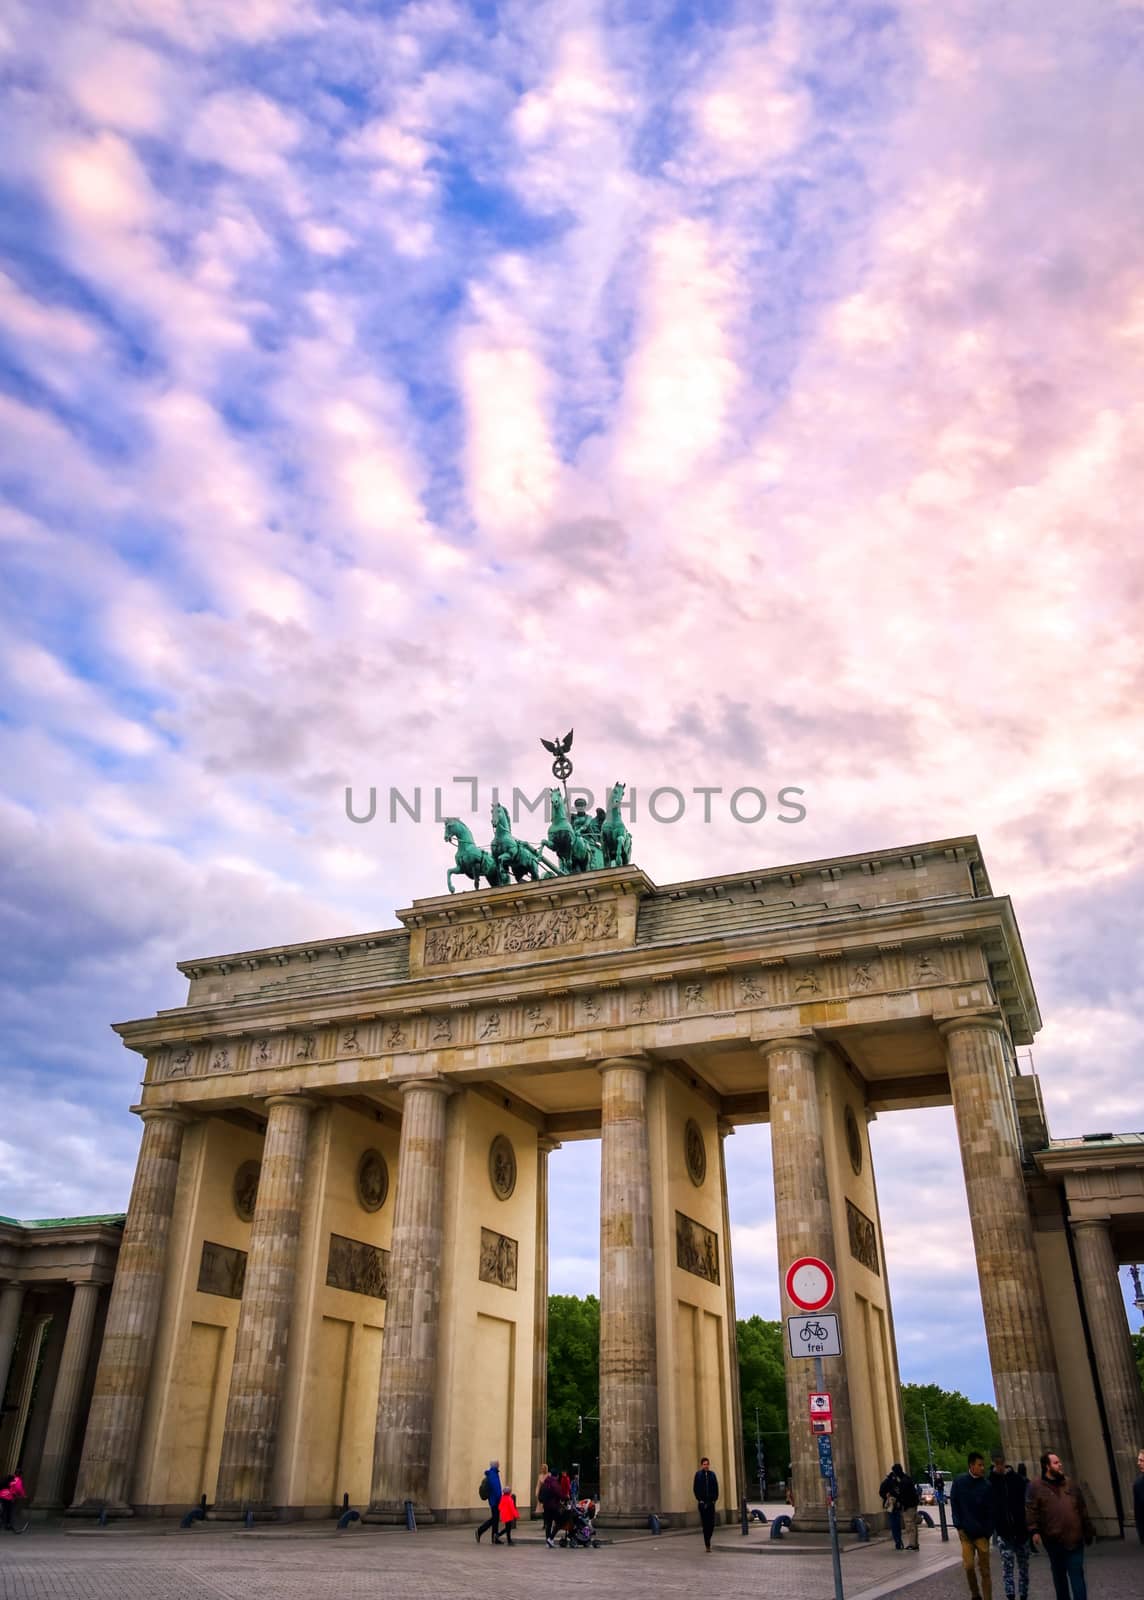 Berlin, Germany - May 3, 2019 - The Brandenburg Gate at sunset located in Pariser Platz in the city of Berlin, Germany.